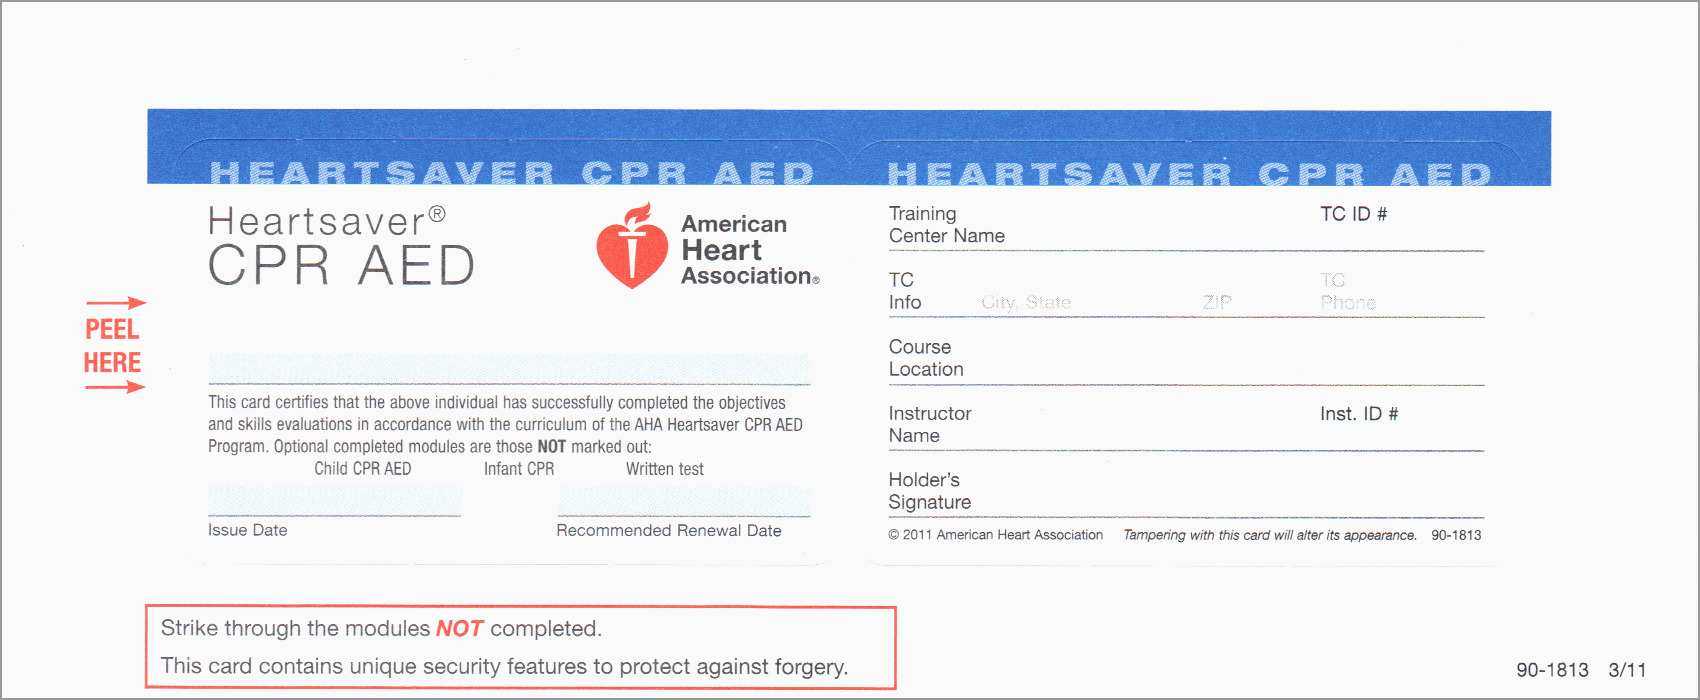 Best Of Free Cpr Card Template | Best Of Template Throughout Cpr Card Template